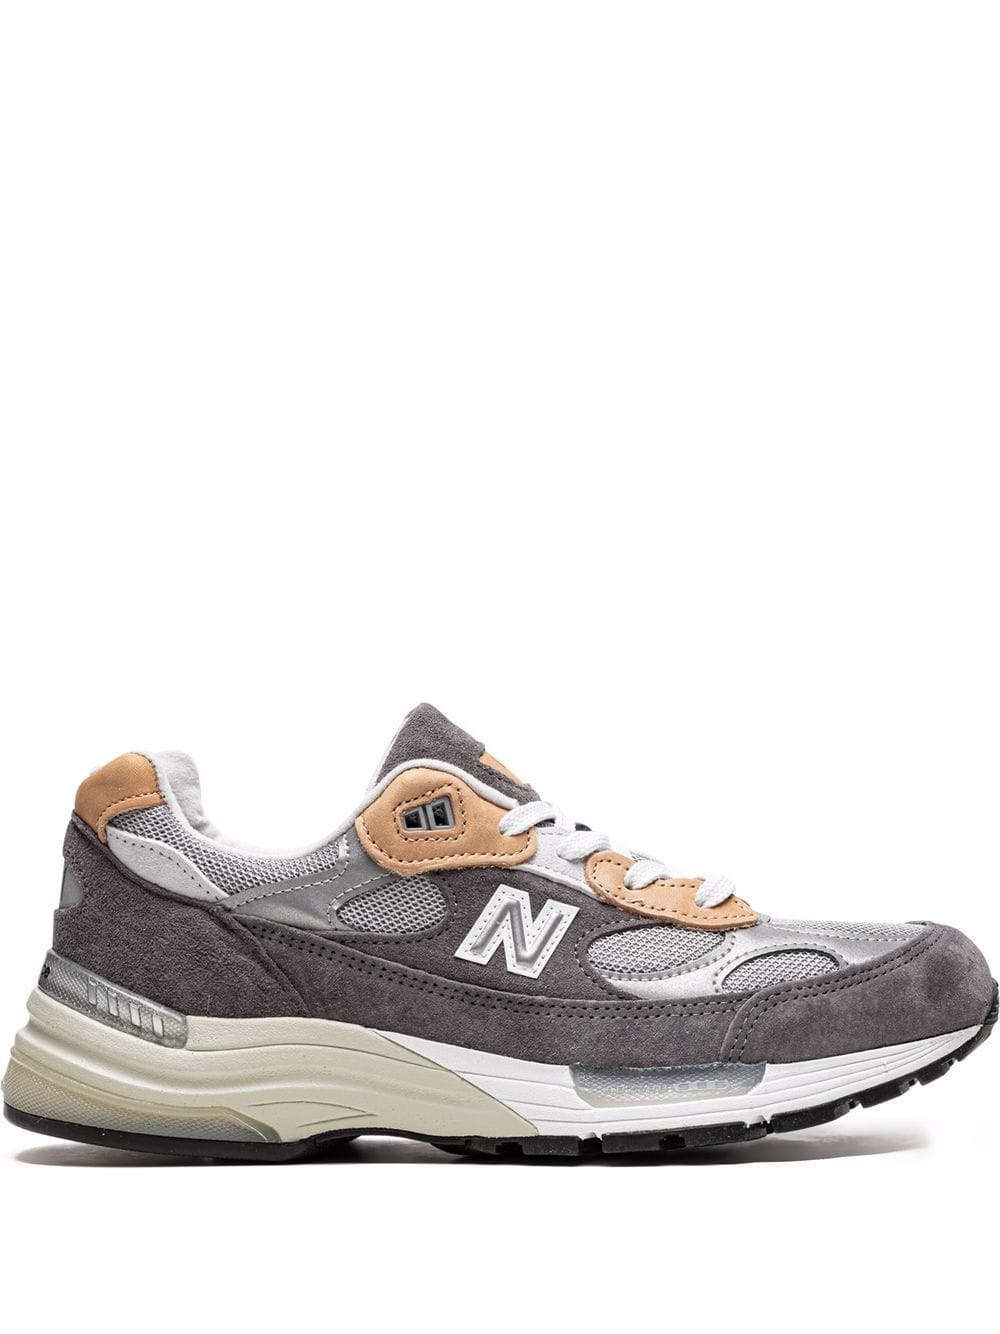 New Balance x Todd Snyder Made in USA 992 sneakers - Grey